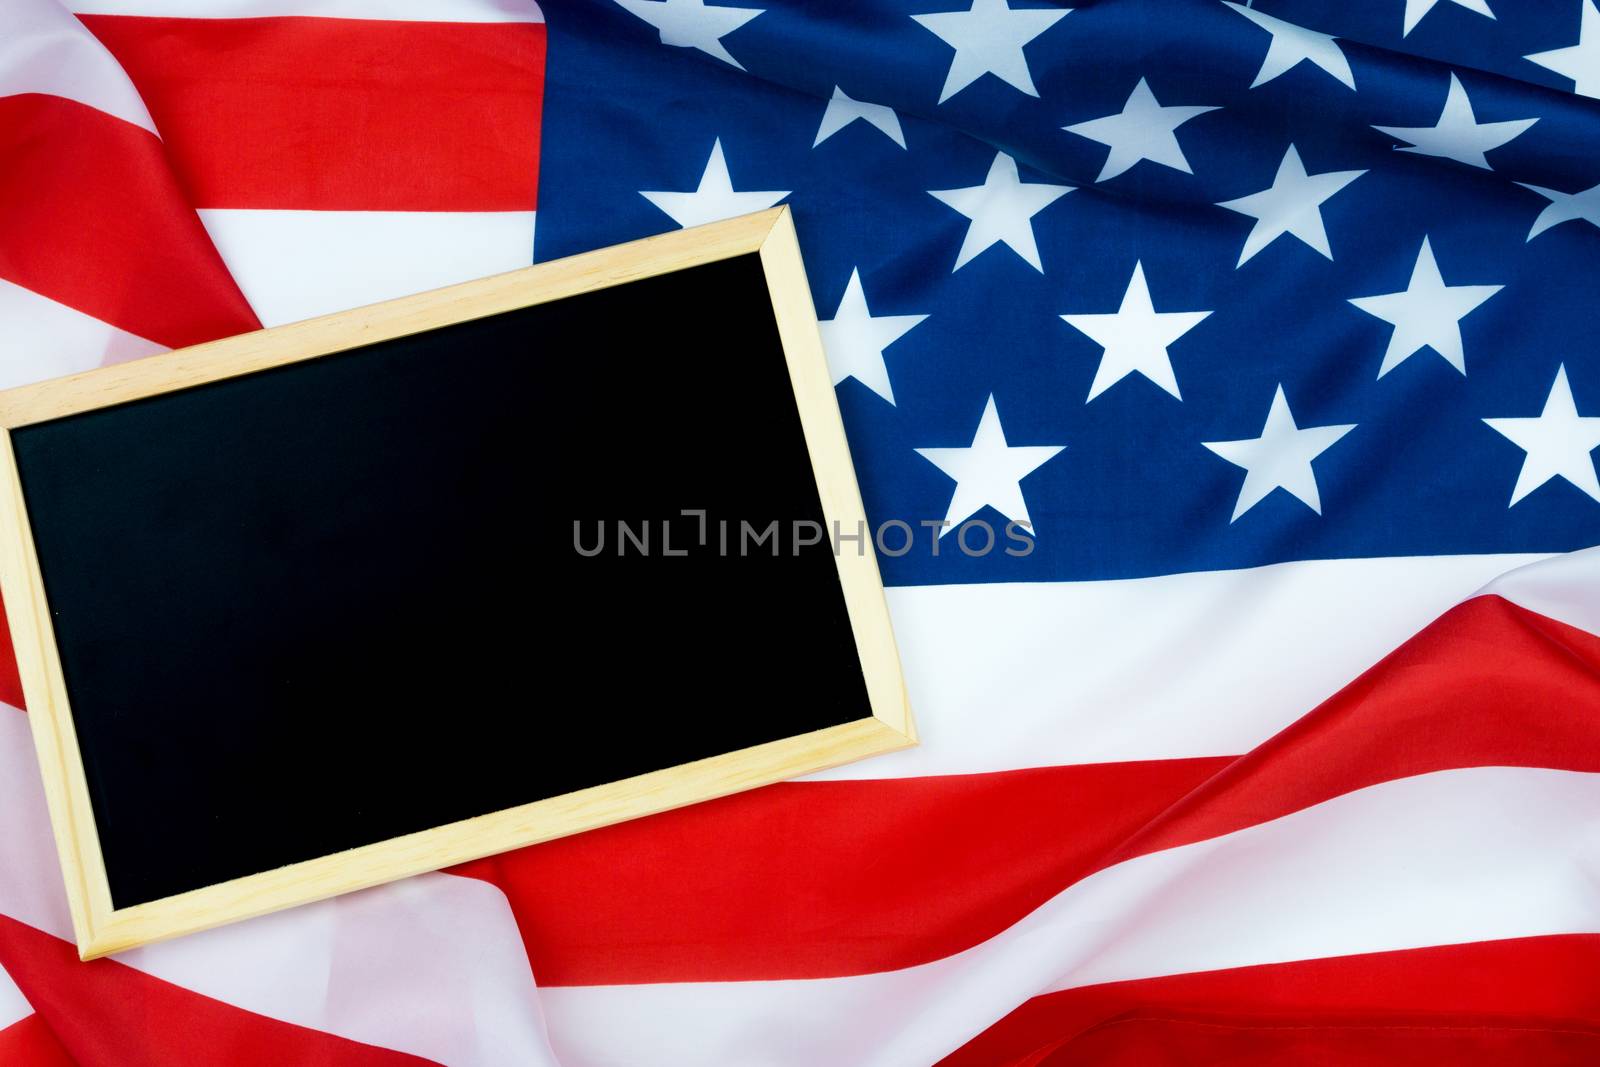 Blackboard on US American flag For USA Memorial day, Veterans day, Labor day, or 4th of July celebration. Top view, copy space for text.